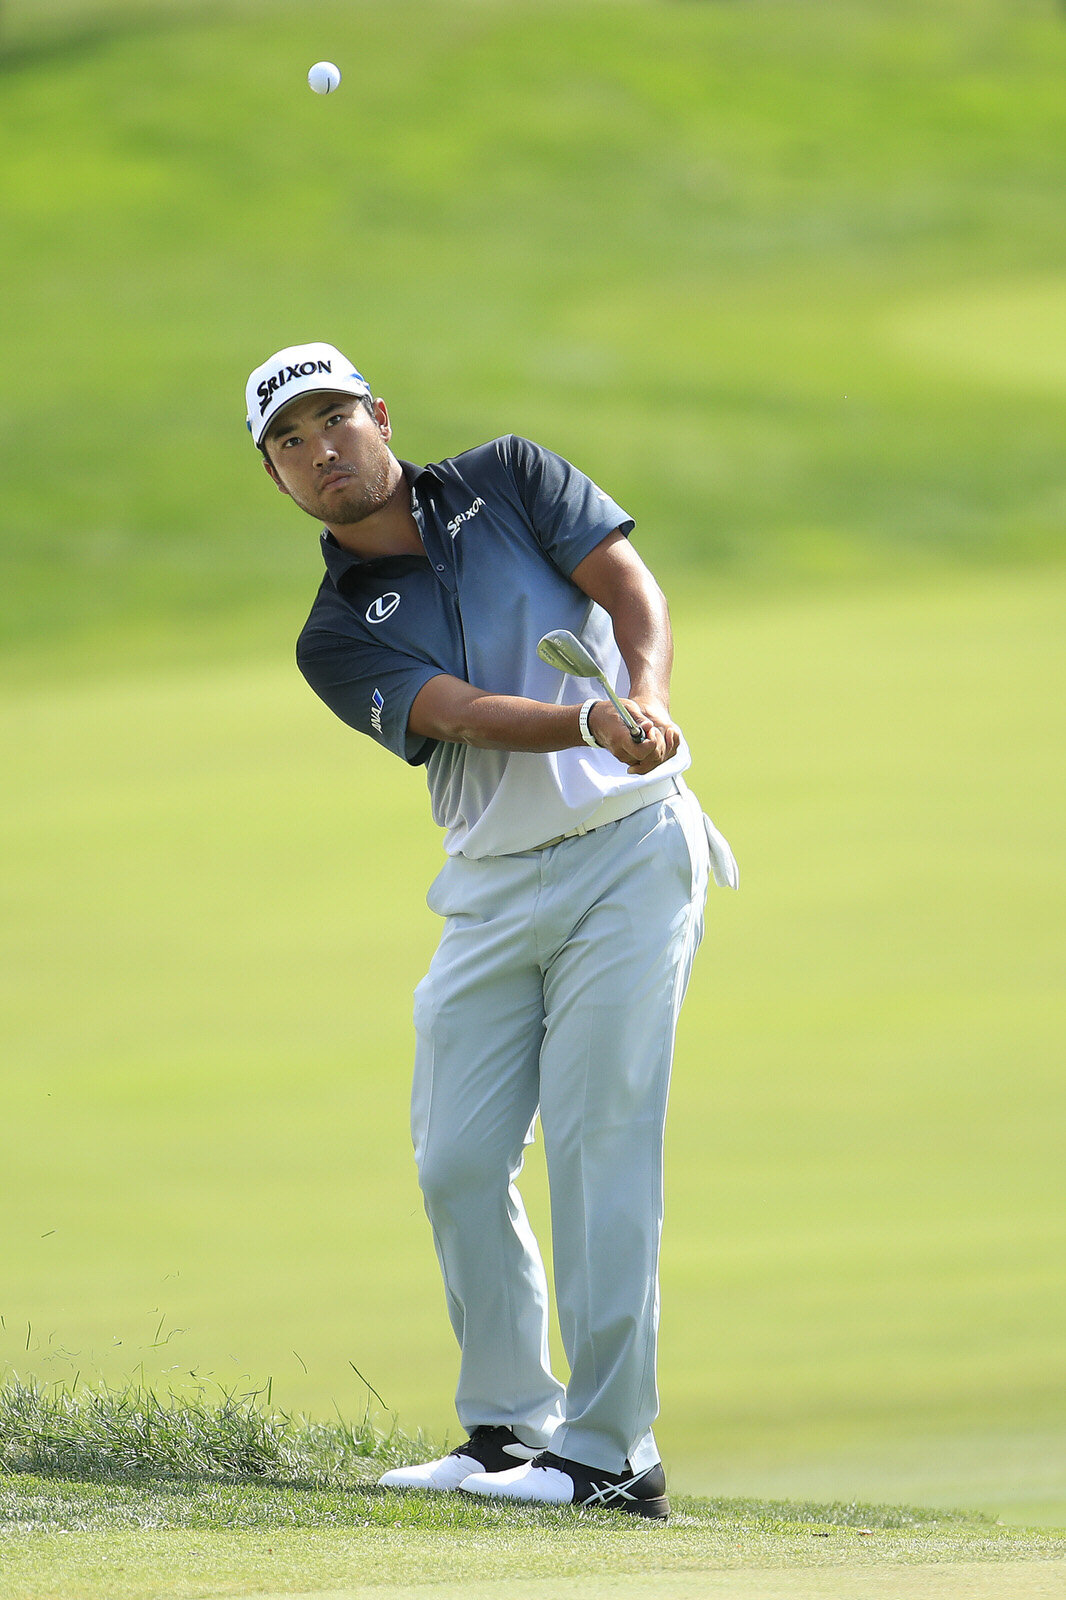  OLYMPIA FIELDS, ILLINOIS - AUGUST 29: Hideki Matsuyama of Japan plays a third shot on the tenth hole during the third round of the BMW Championship on the North Course at Olympia Fields Country Club on August 29, 2020 in Olympia Fields, Illinois. (P